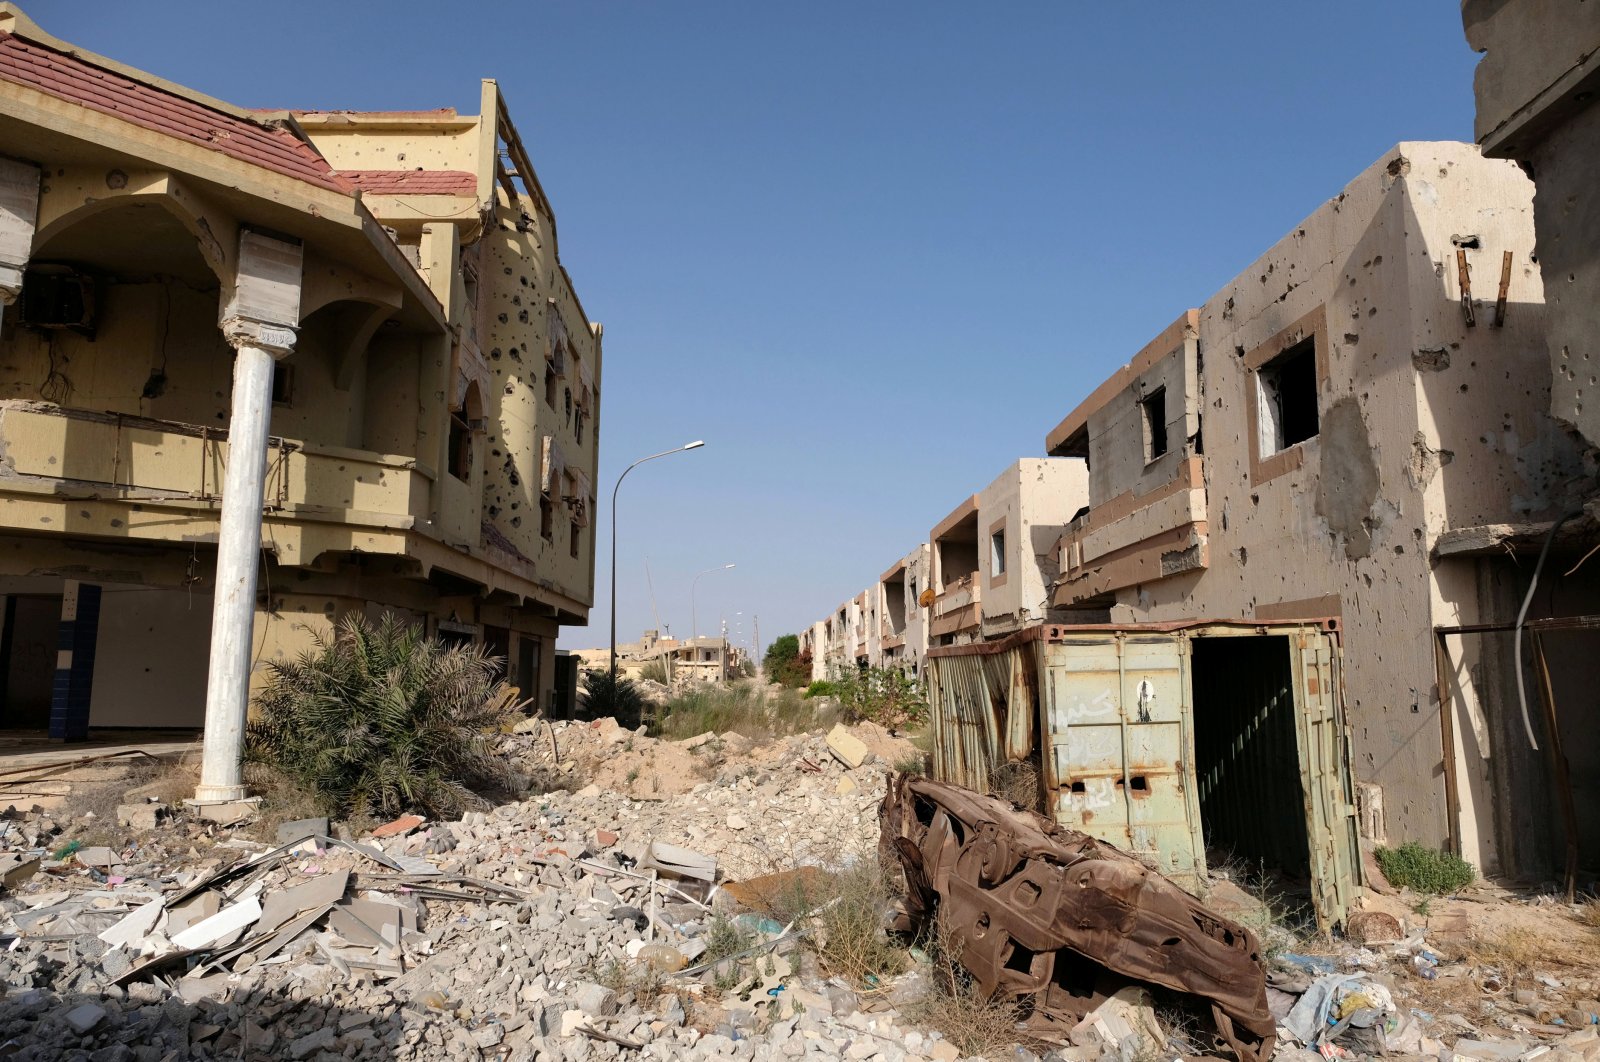 Buildings destroyed during past clashes are seen in Sirte, Libya, August 18, 2020. (REUTERS Photo)